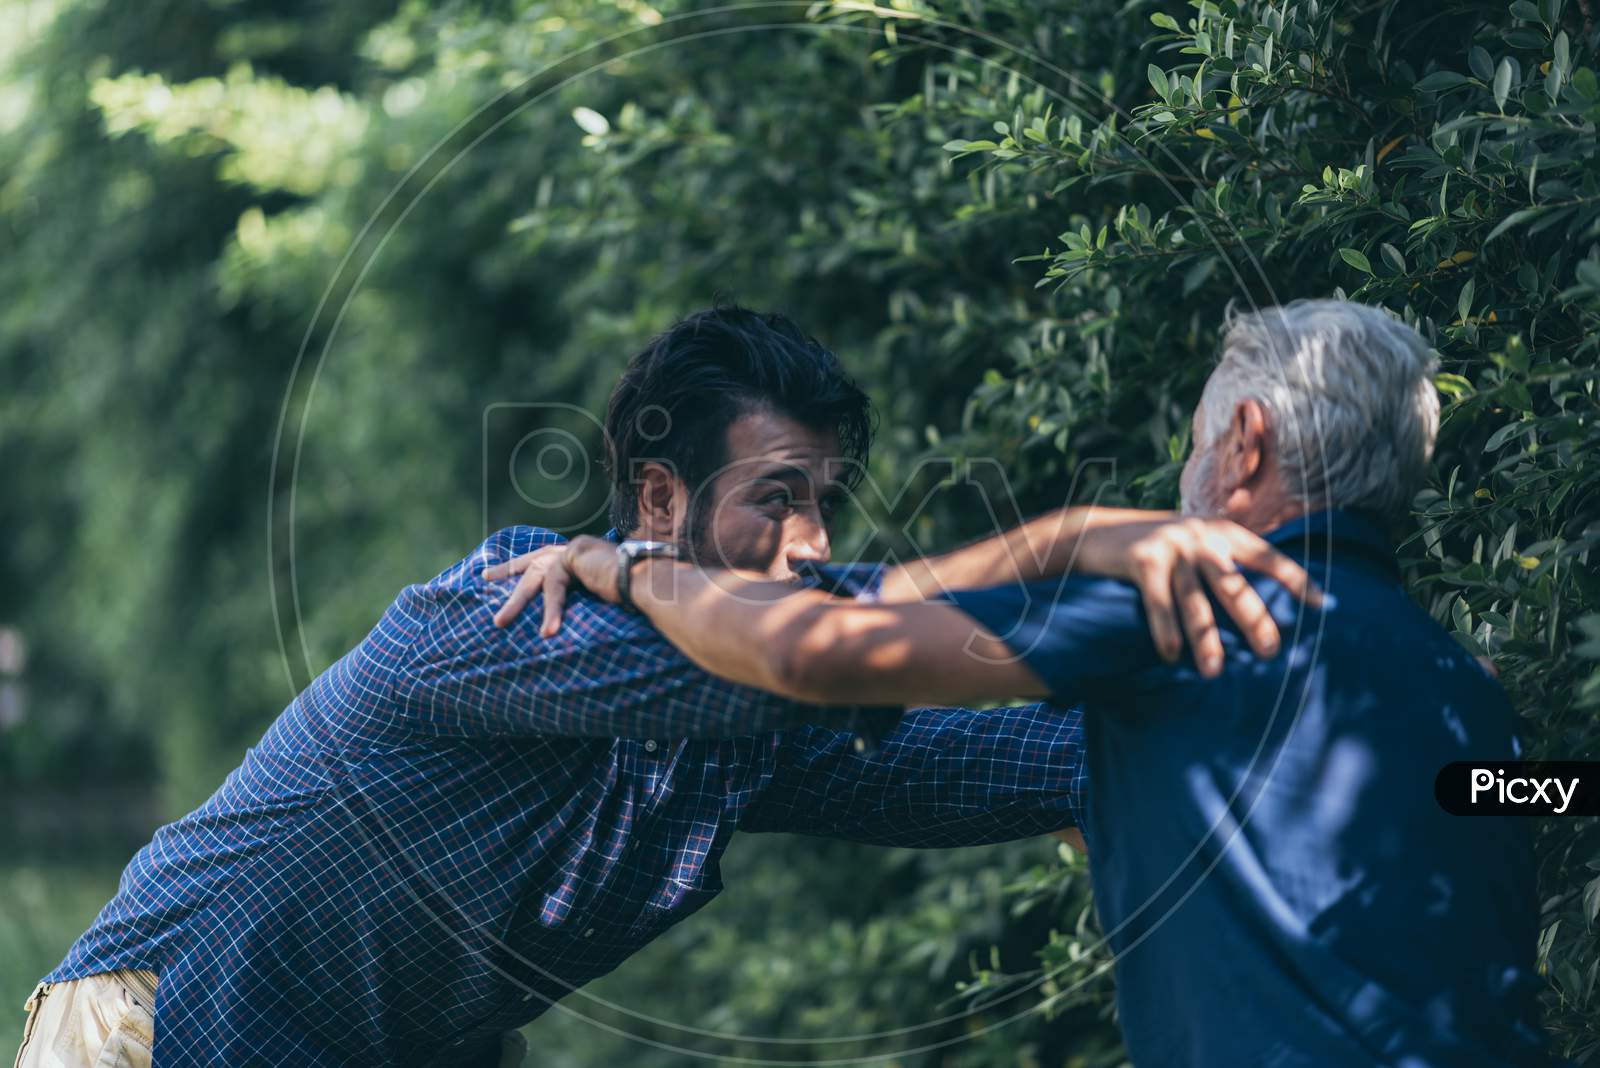 The Old Man And His Son Are Walking In The Park. A Man Hugs His Elderly Father. They Are Happy And Smiling